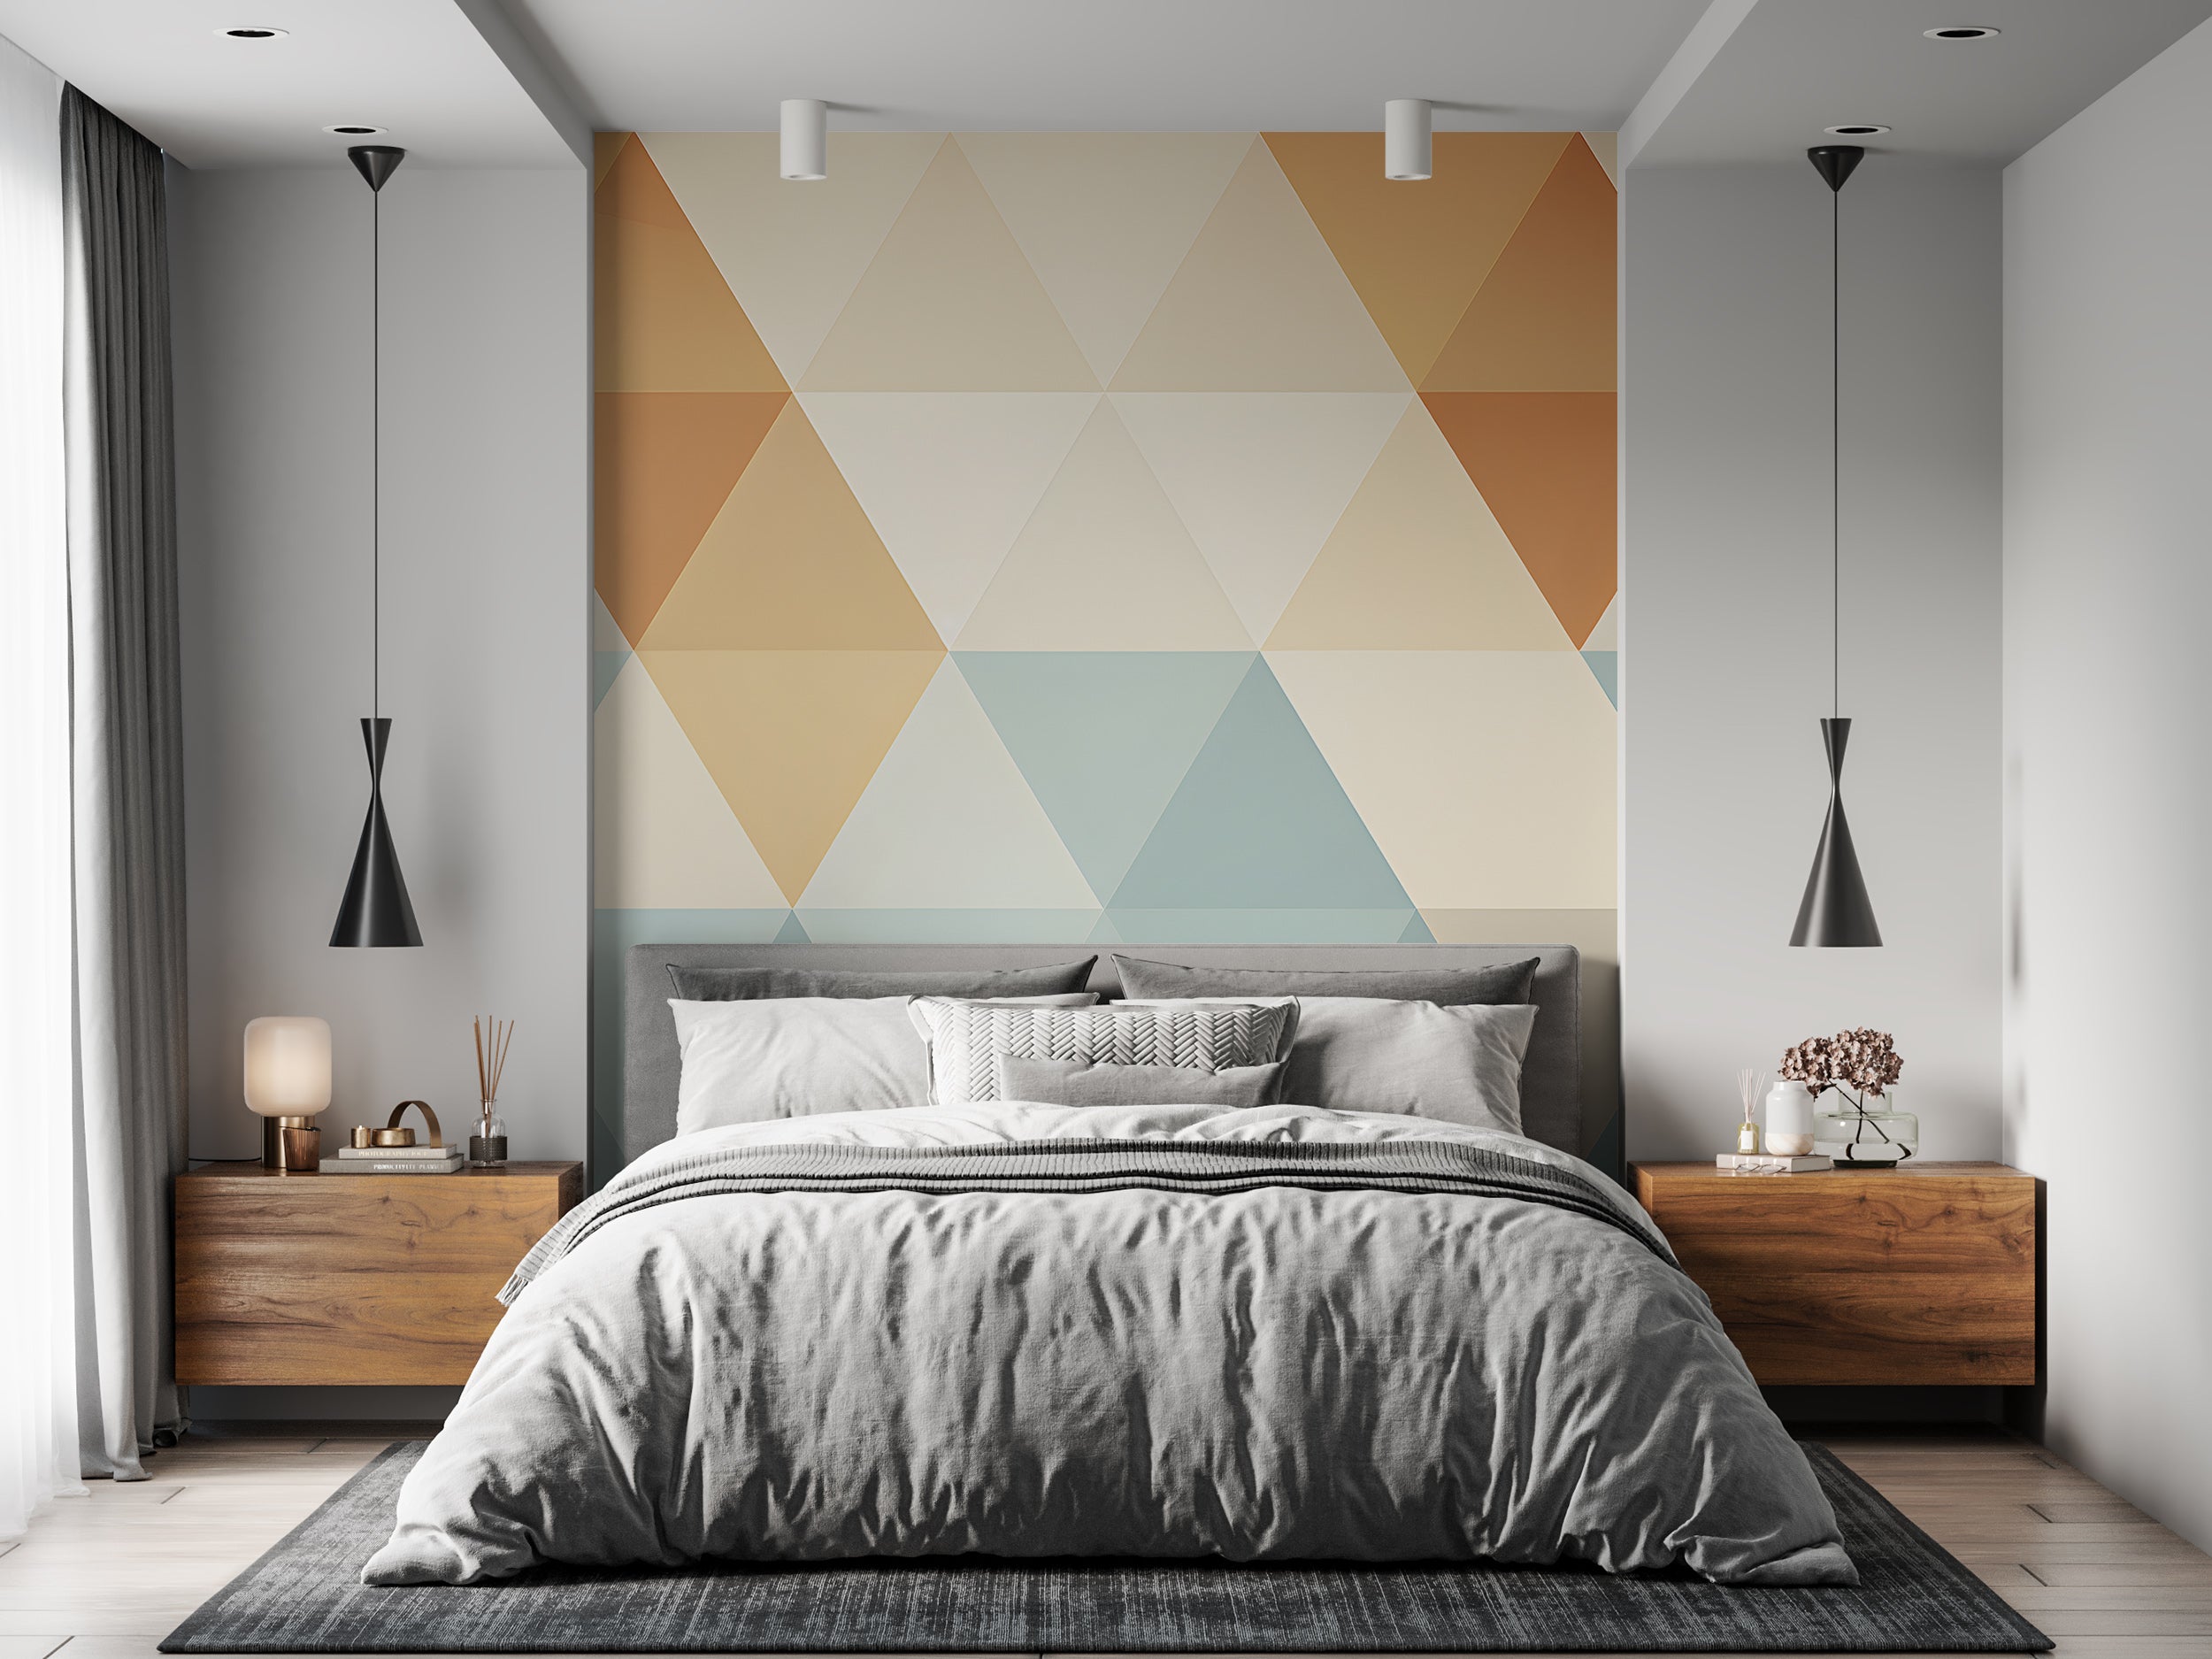 Easy-to-Apply Geometric Wall Decal